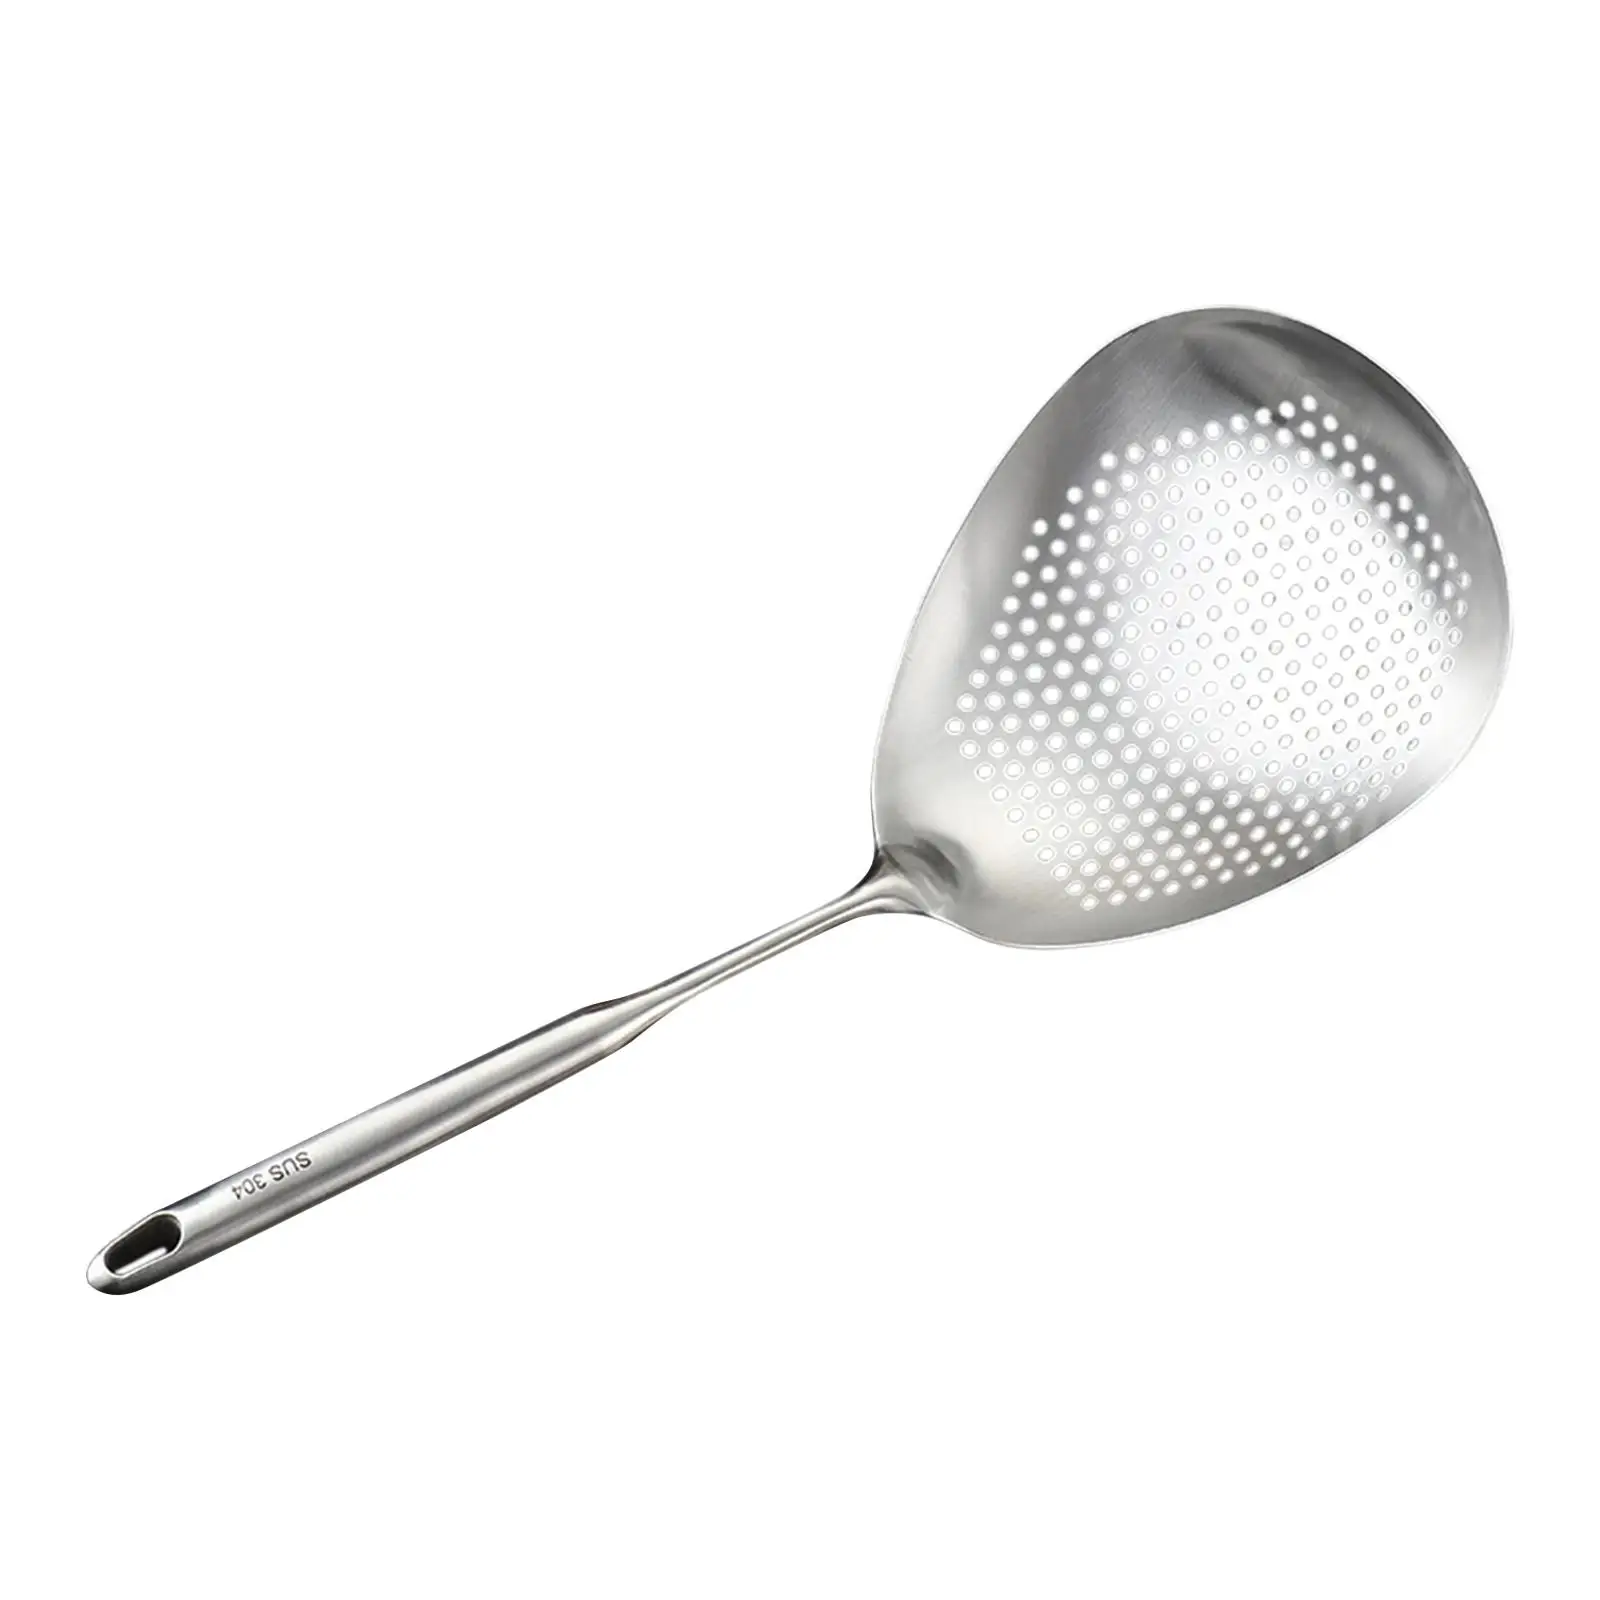 Stainless Steel Skimmer Slotted Spoon Food Strainer Anti Scald Comfort Grip